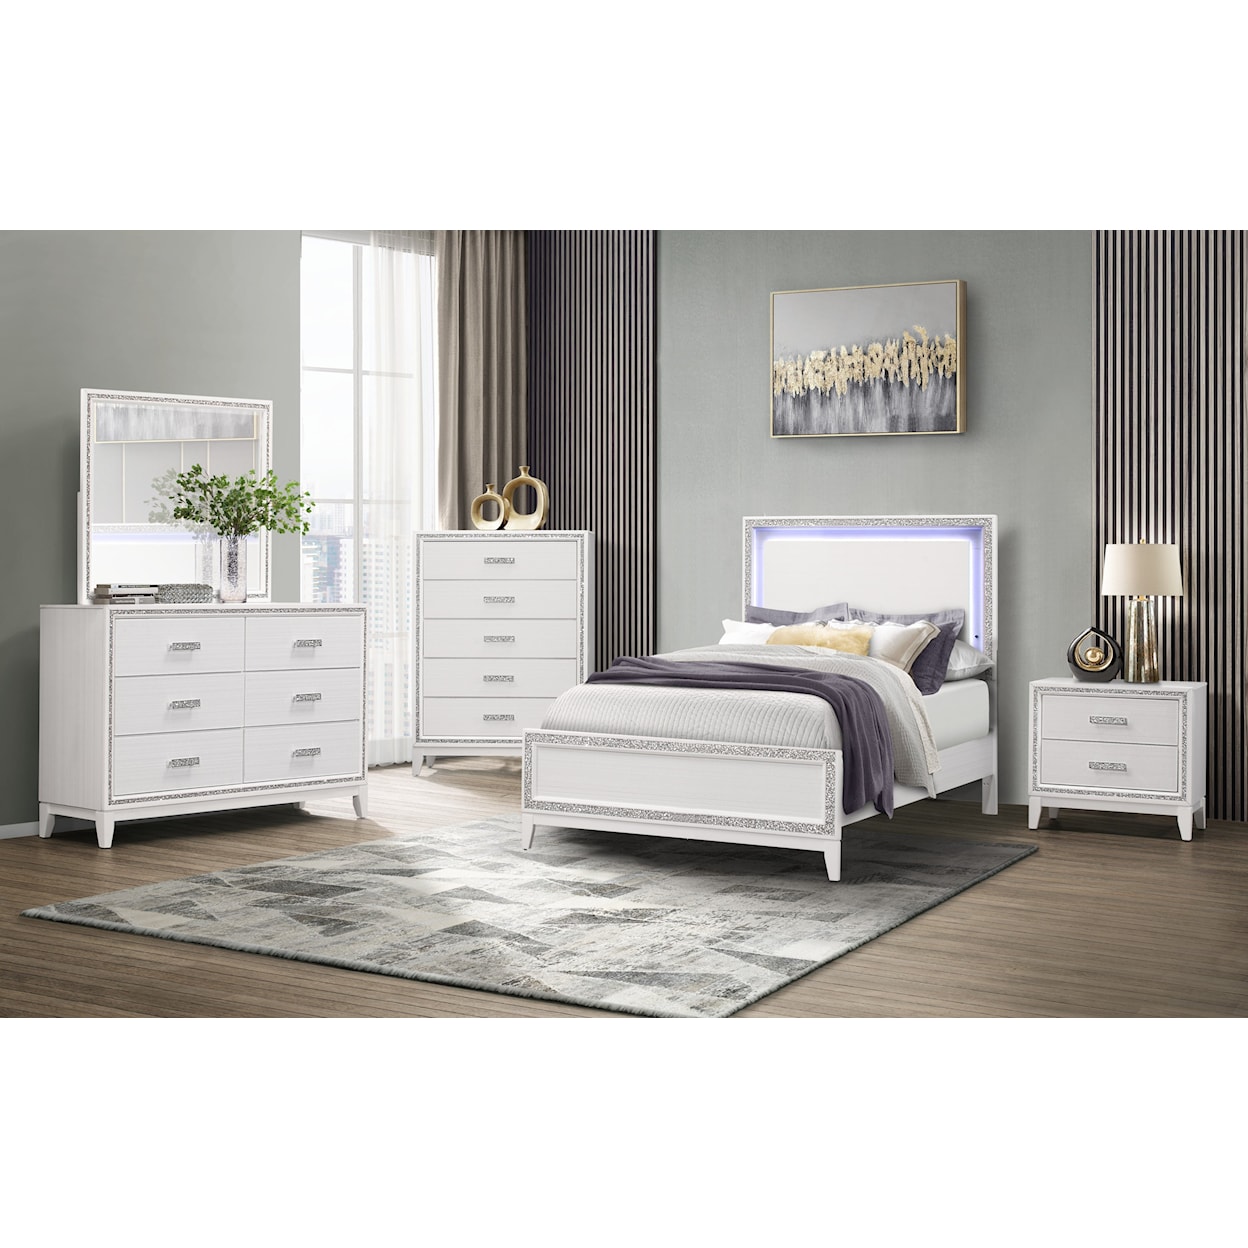 Global Furniture Lily White 2-Drawer Nightstand with Glitter Trim